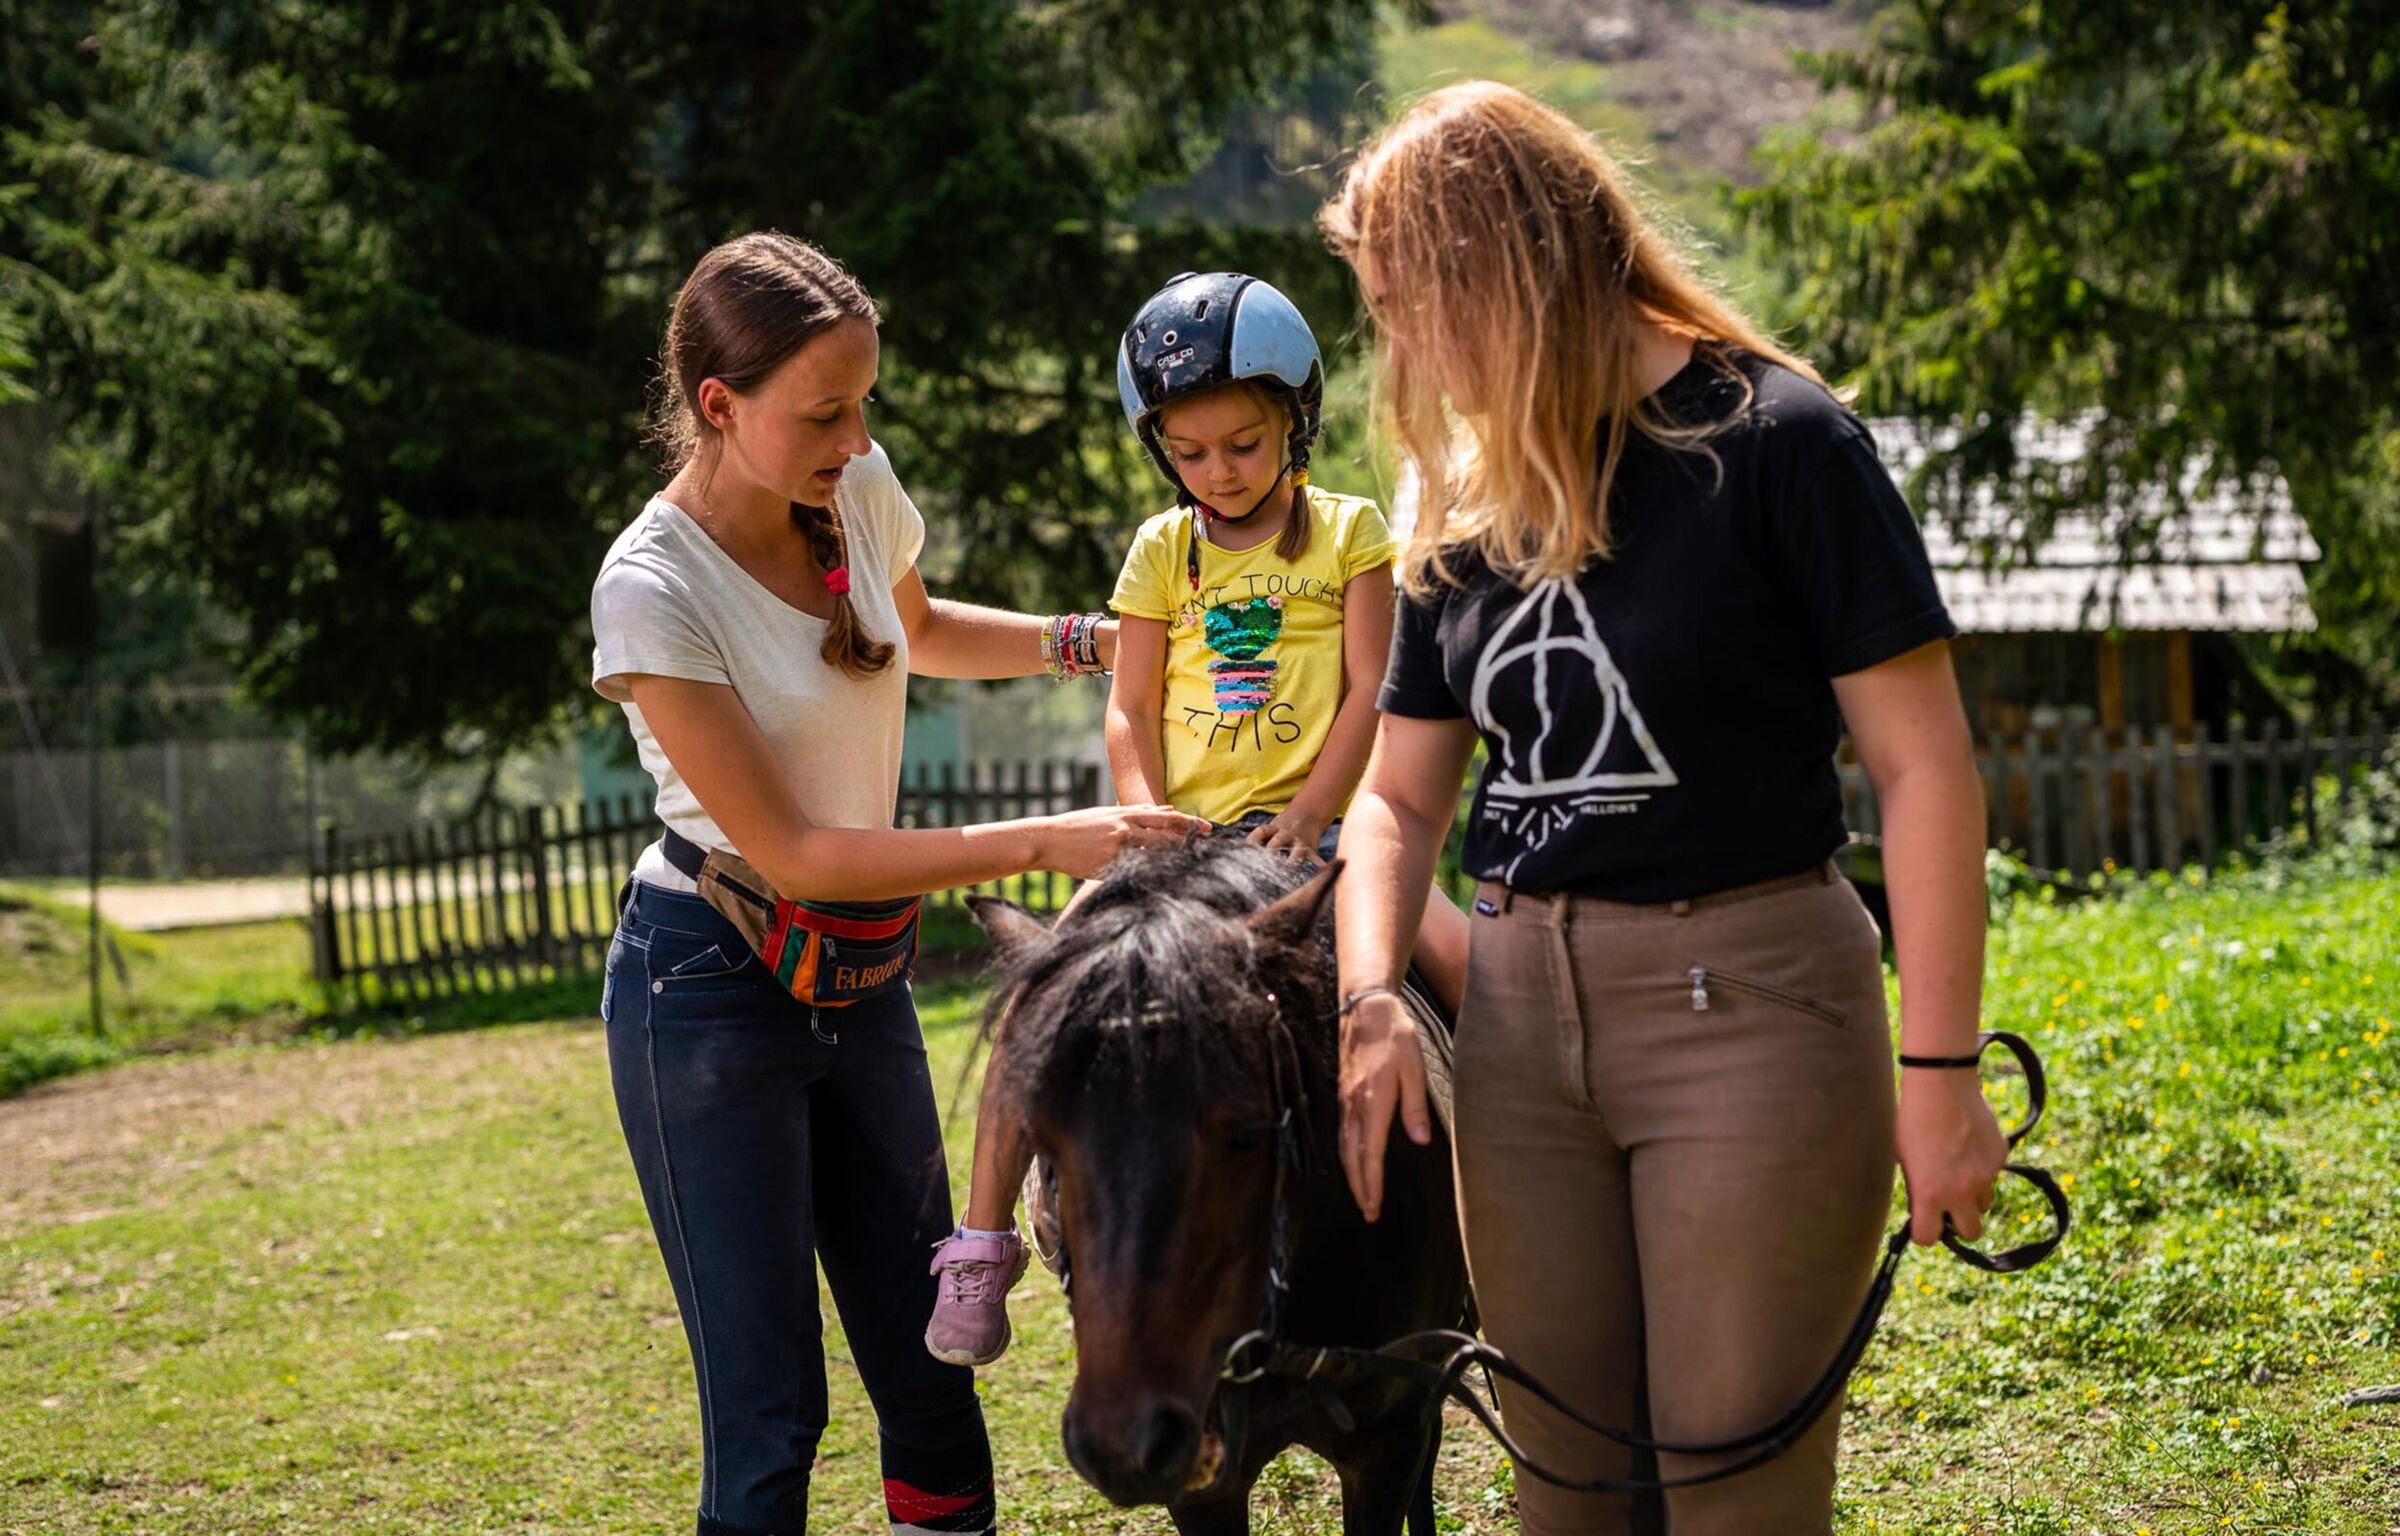 A little girl with a helmet sits on a dark pony and is supported by a woman